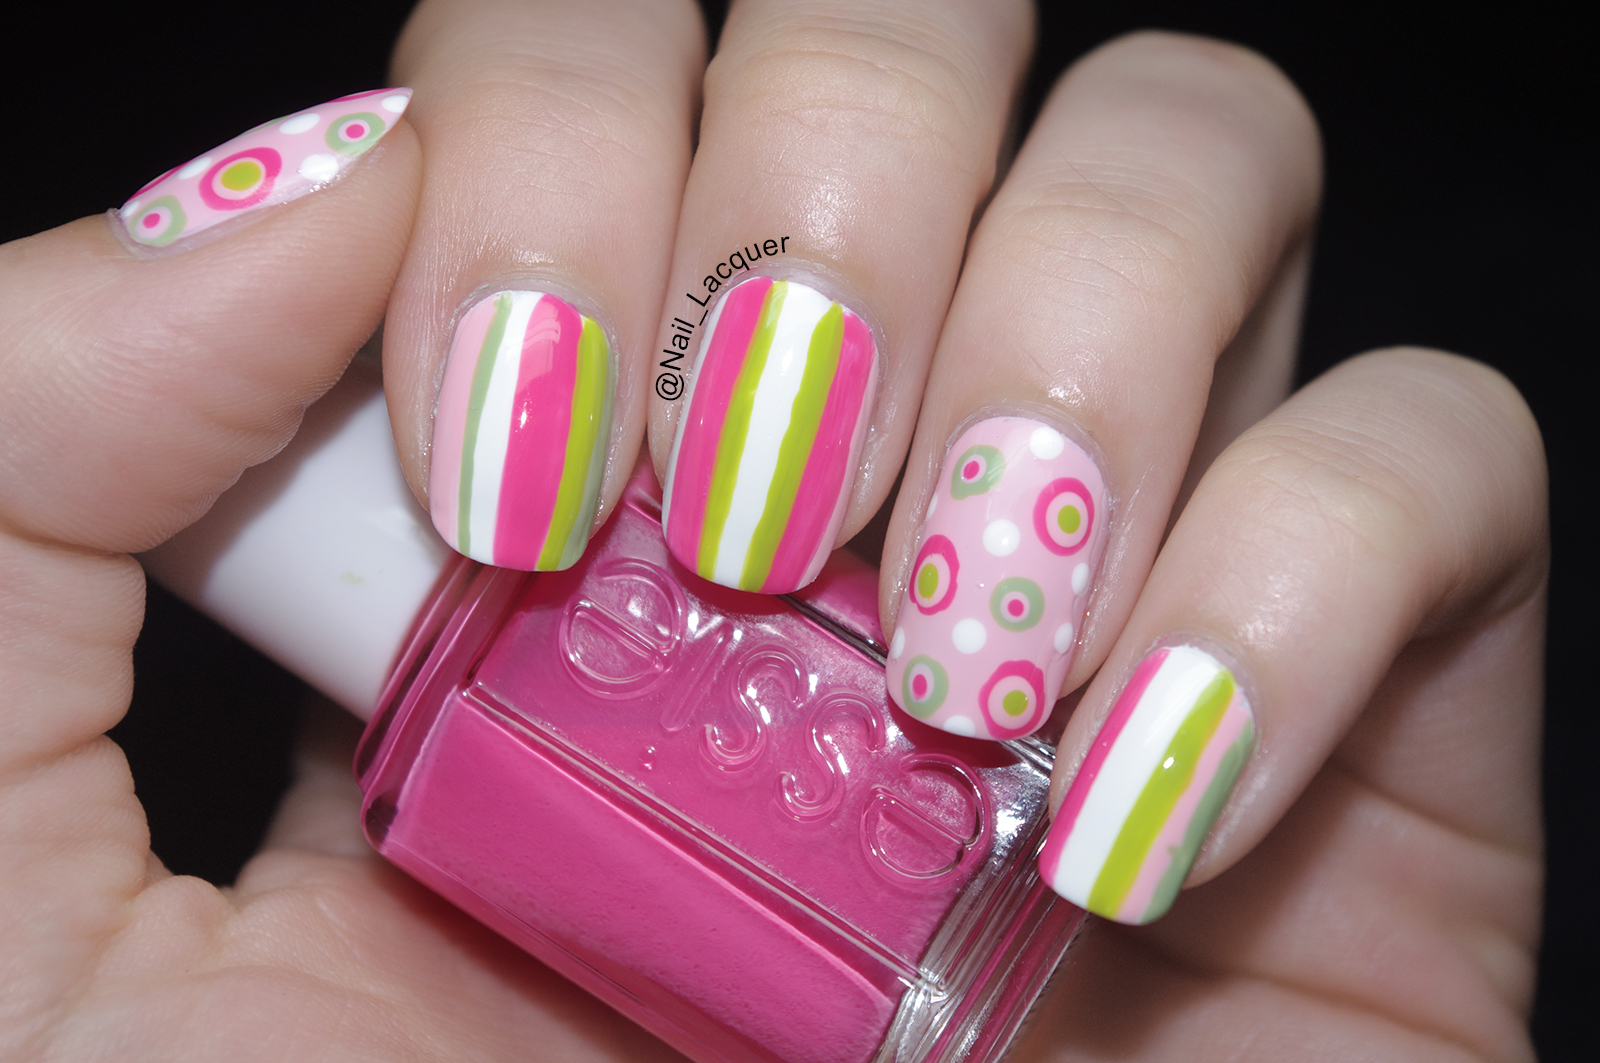 5. Elegant Dotted and Striped Nail Designs - wide 3